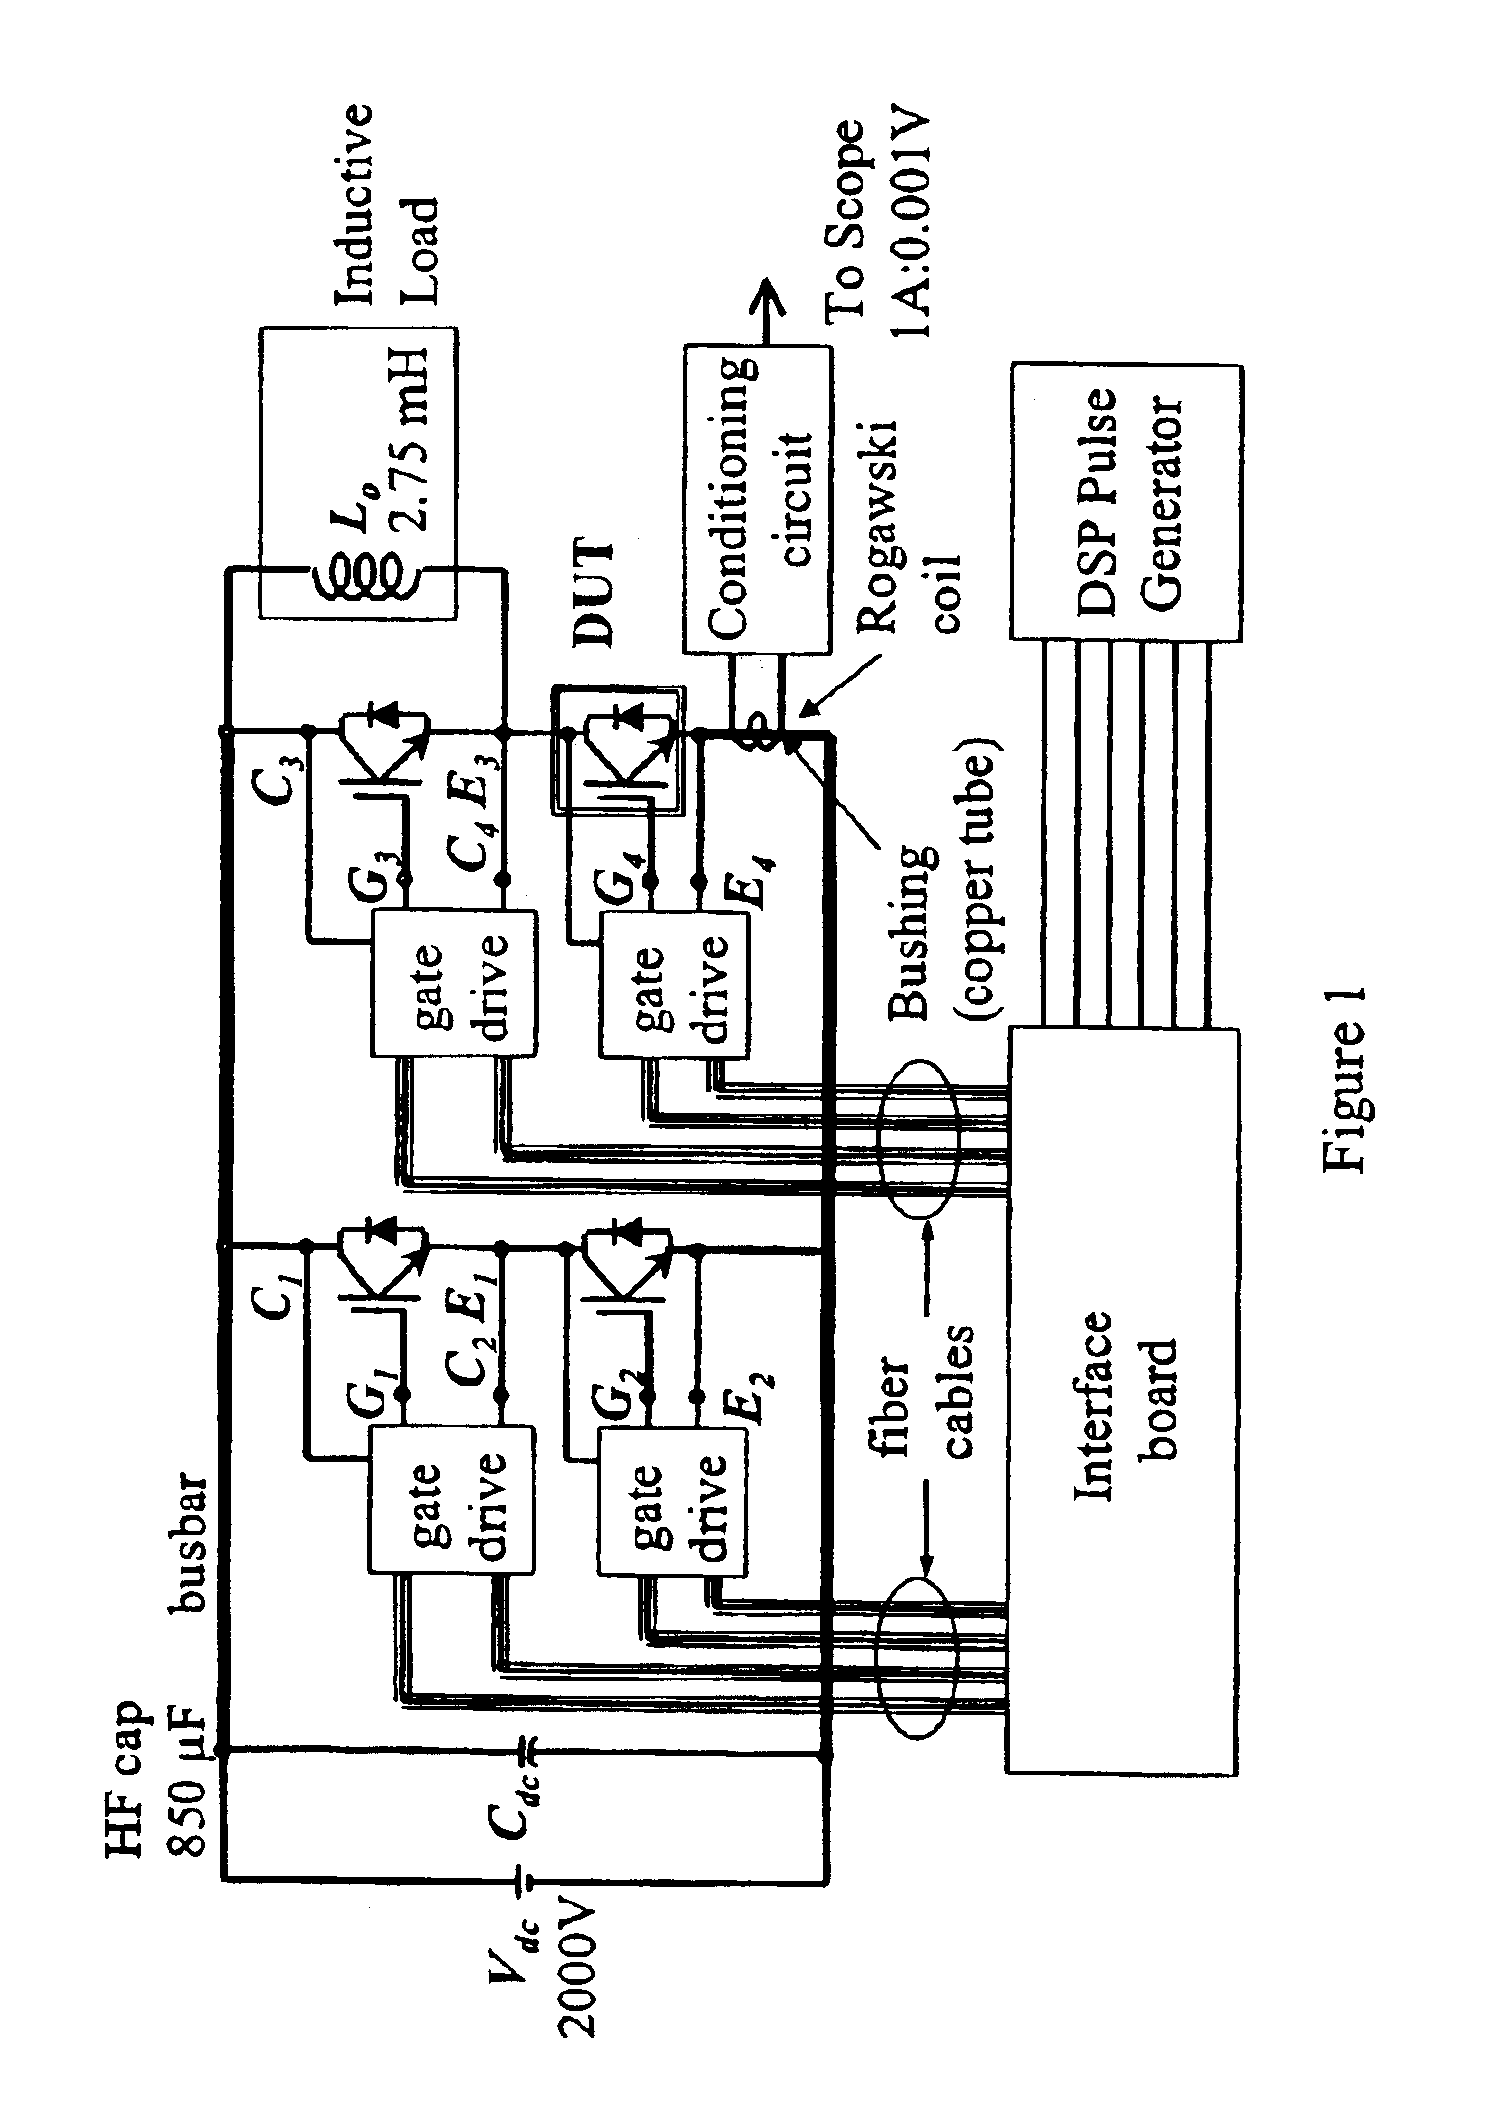 Power inverter with optical isolation